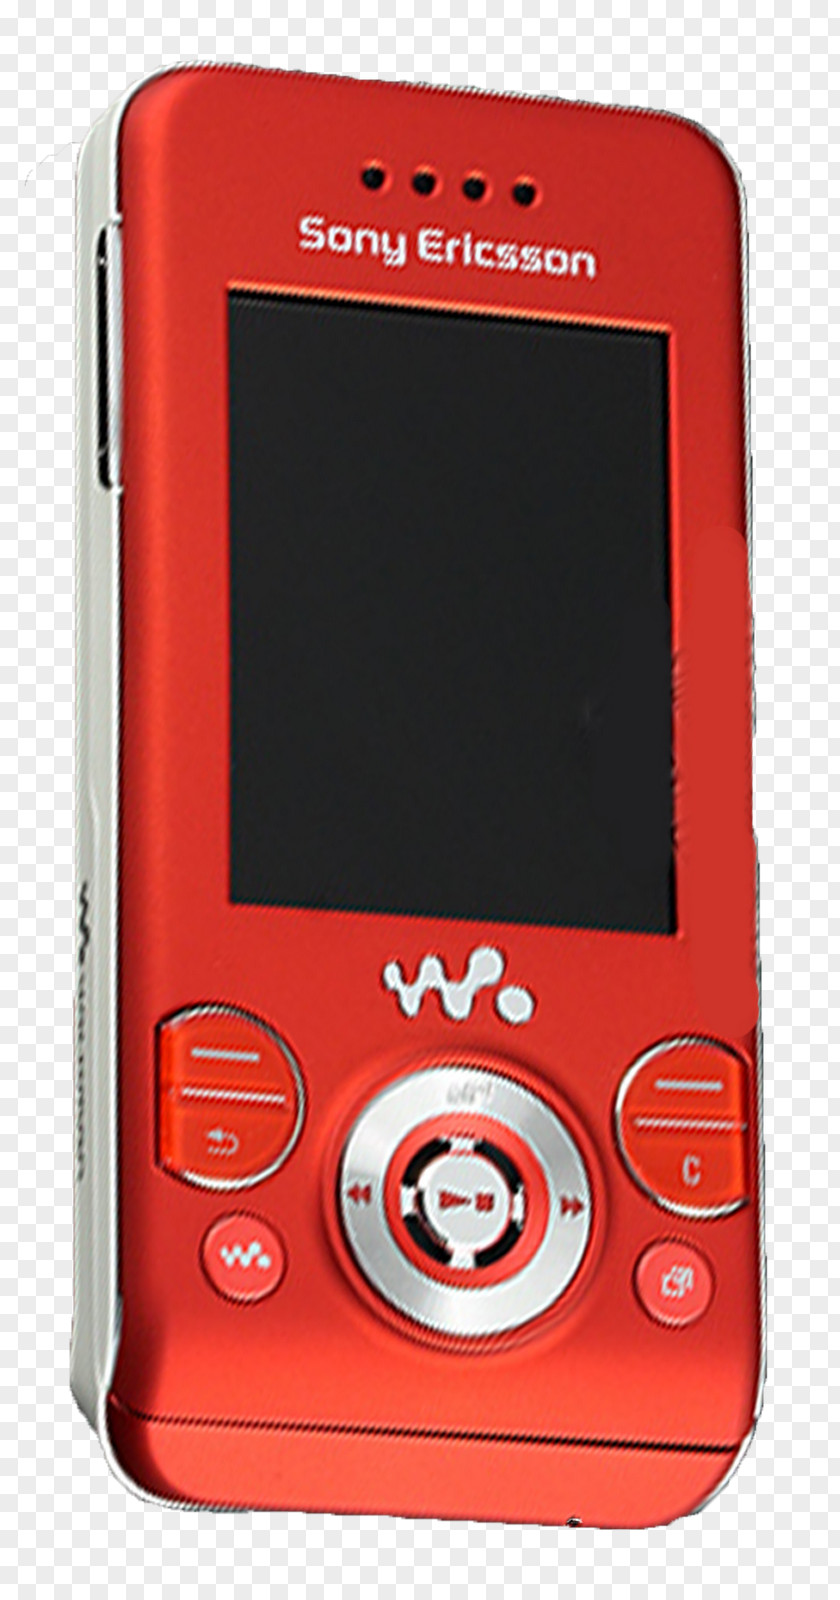 Feature Phone Sony Ericsson W580i Mobile Accessories Handheld Devices PNG